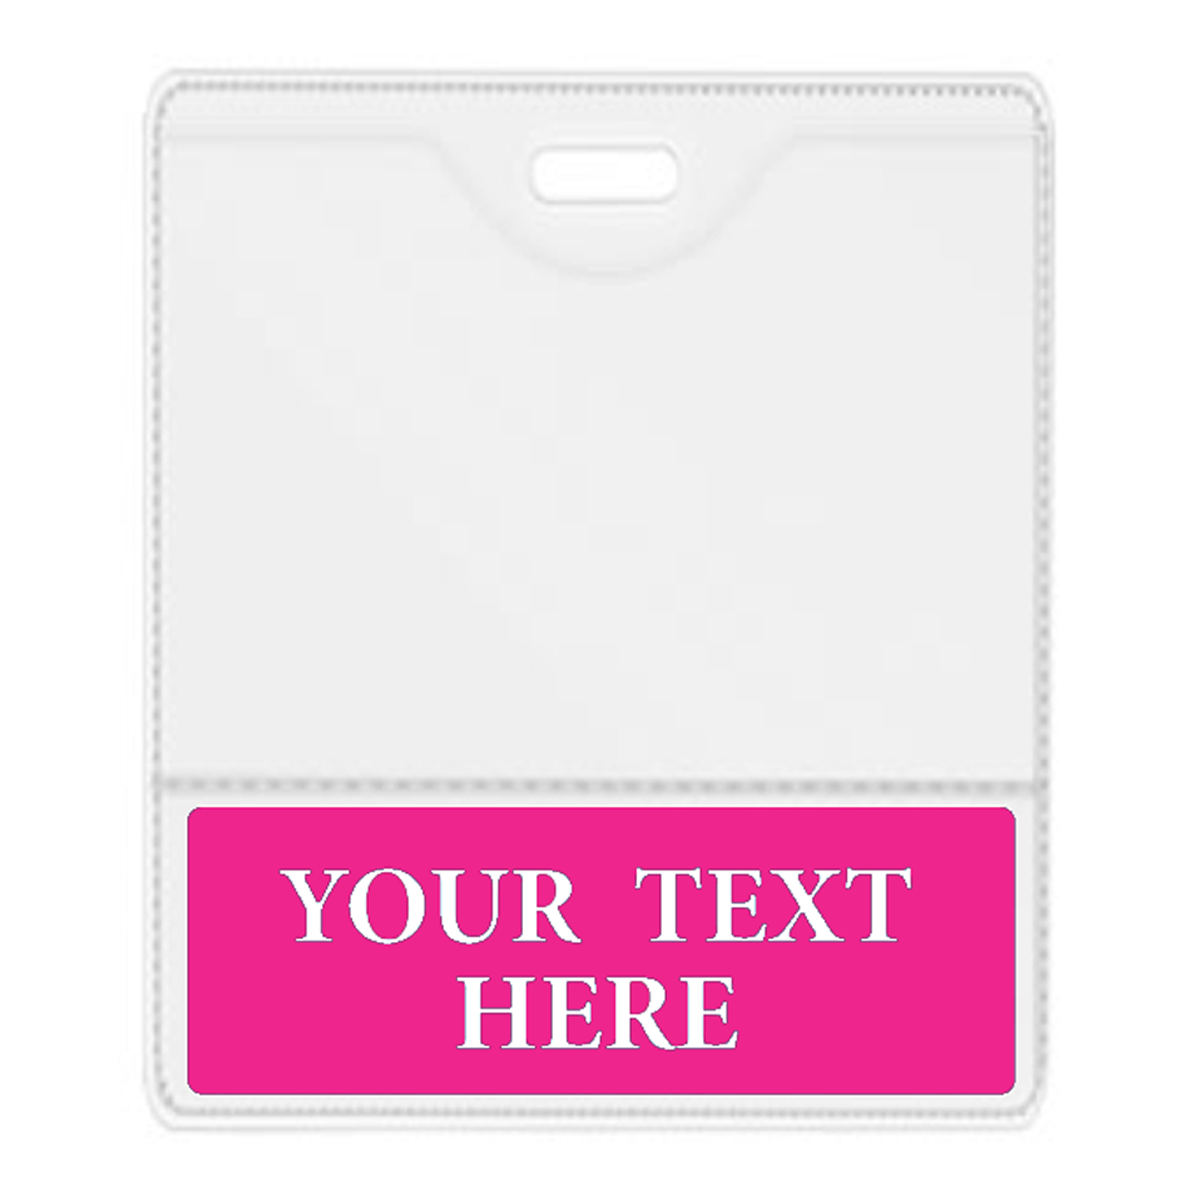 Custom Printed BadgeBottom ® Horizontal with Hot Pink Border - 2 in 1 Badge Holder Sleeve for I'd Badge and Badge Buddy - Double Side Printed Title Tag